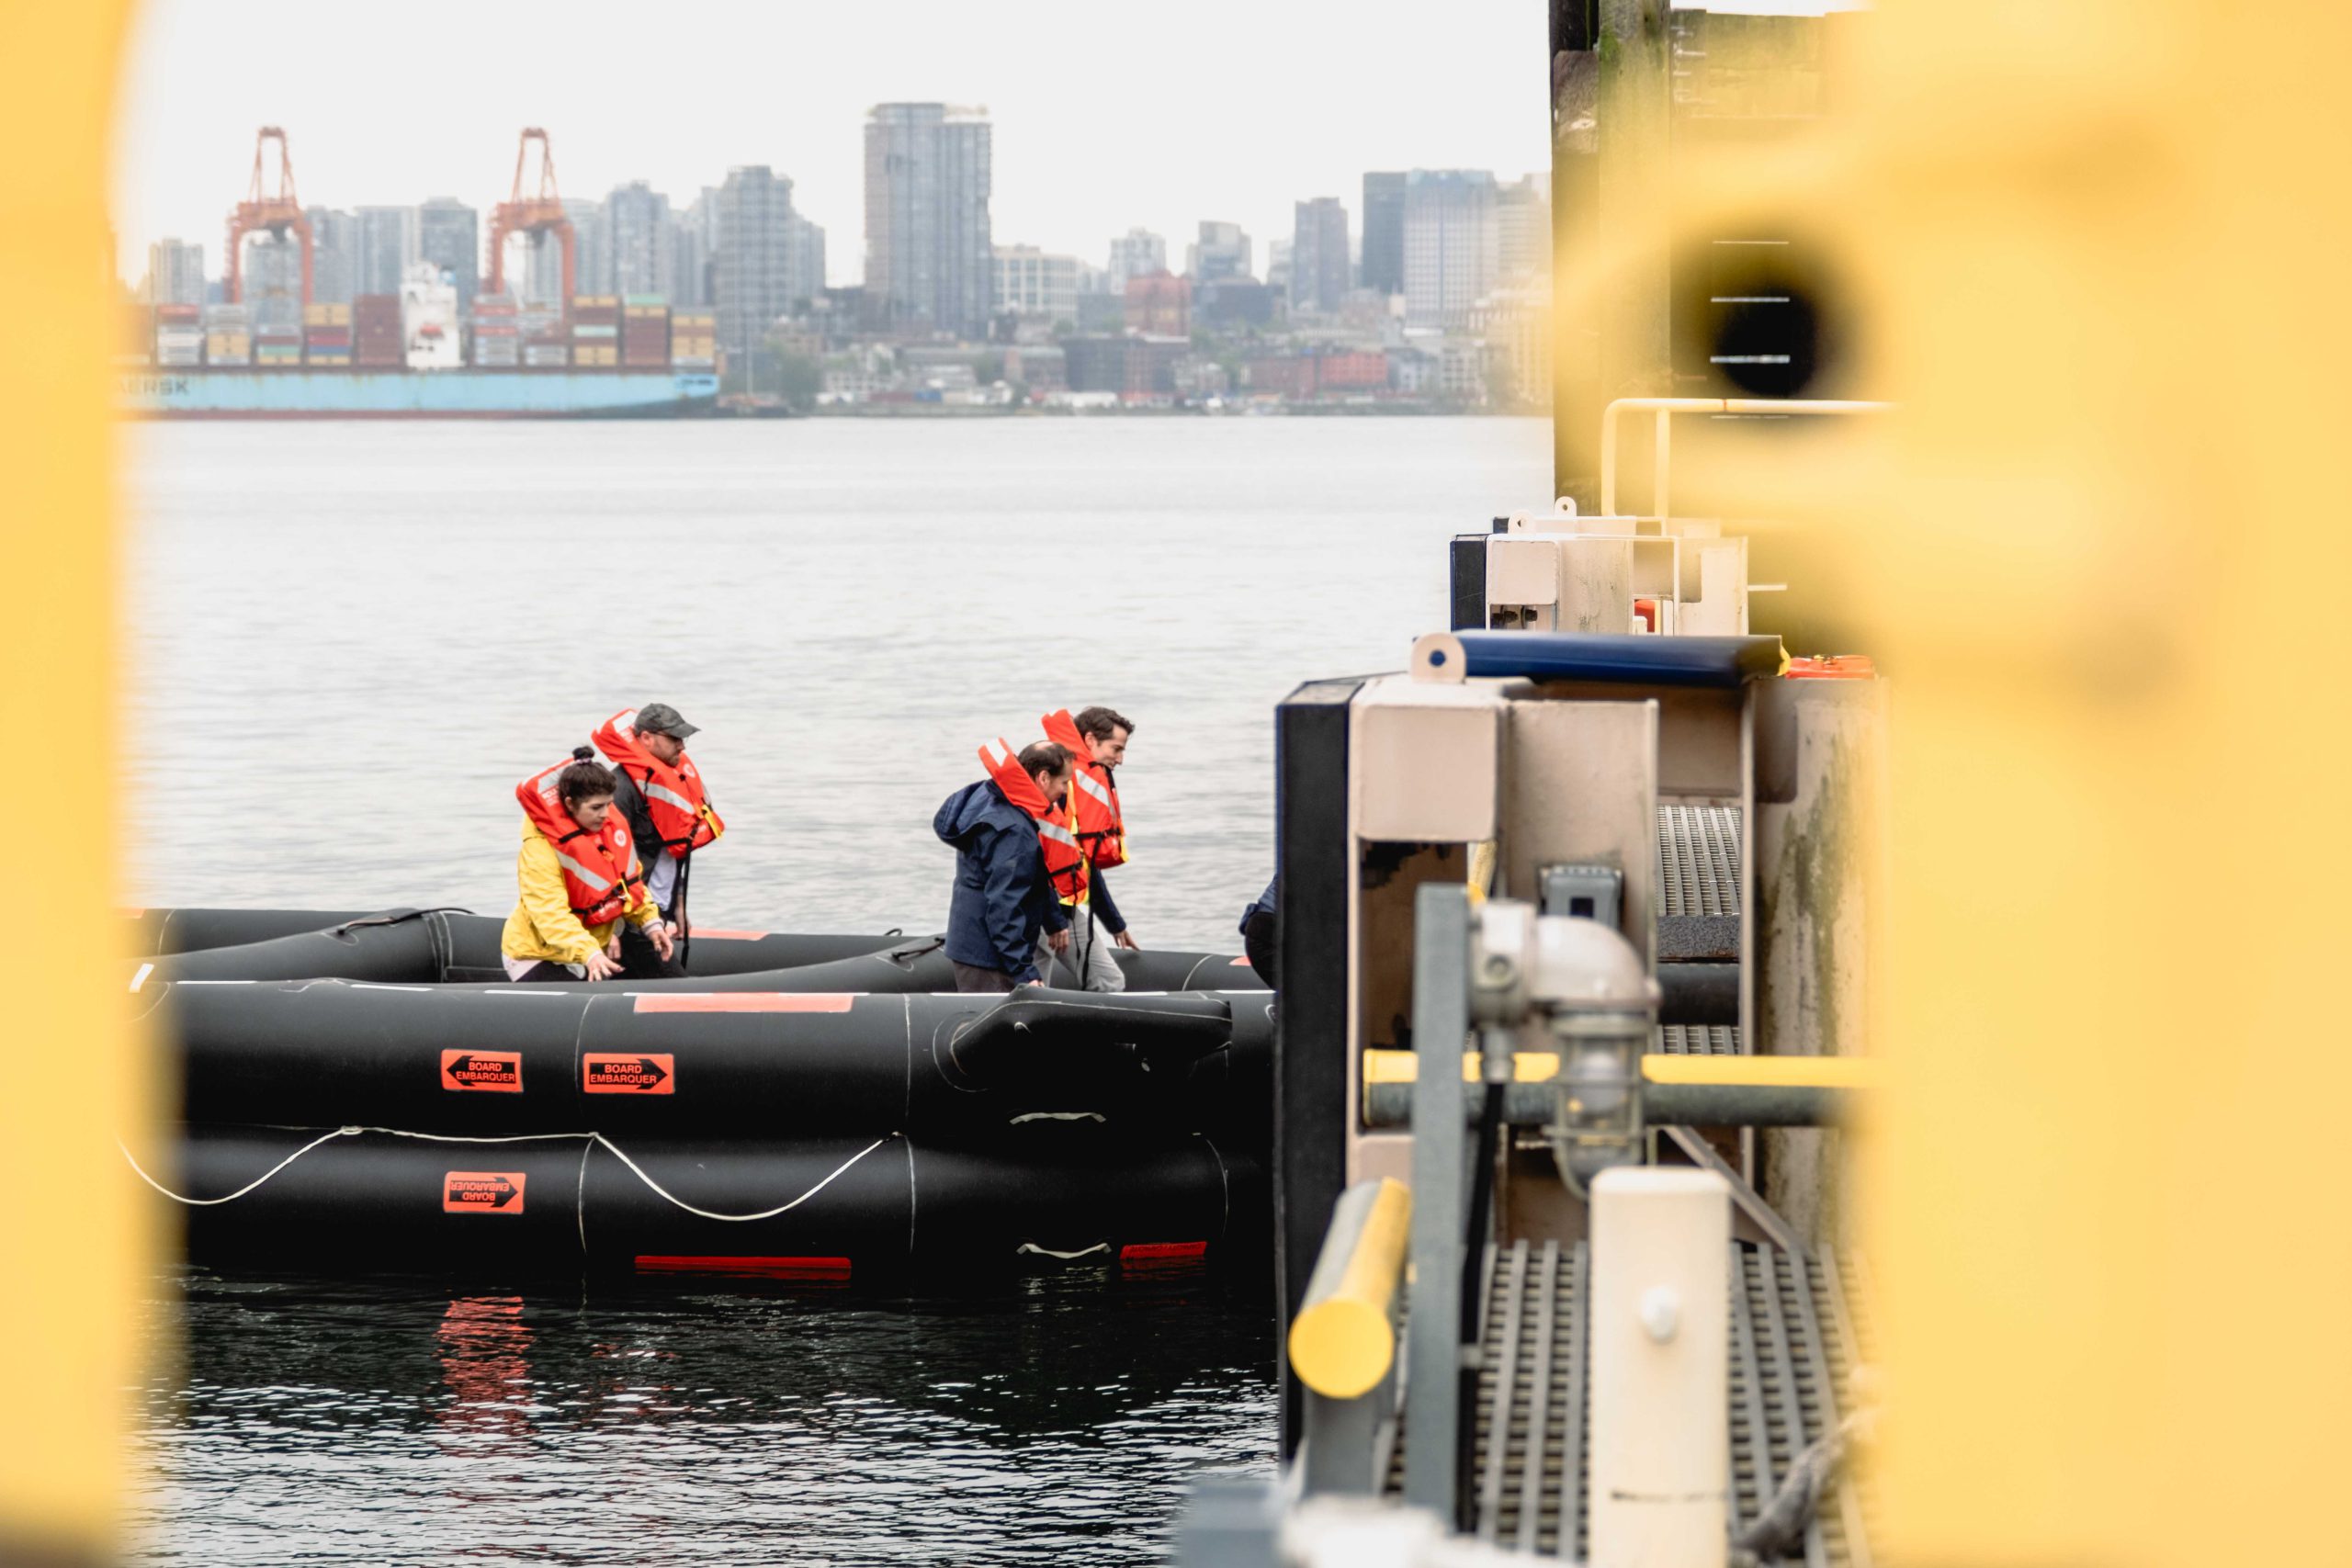 SeaBus passengers arrive safely to shore, stepping out of the life raft.